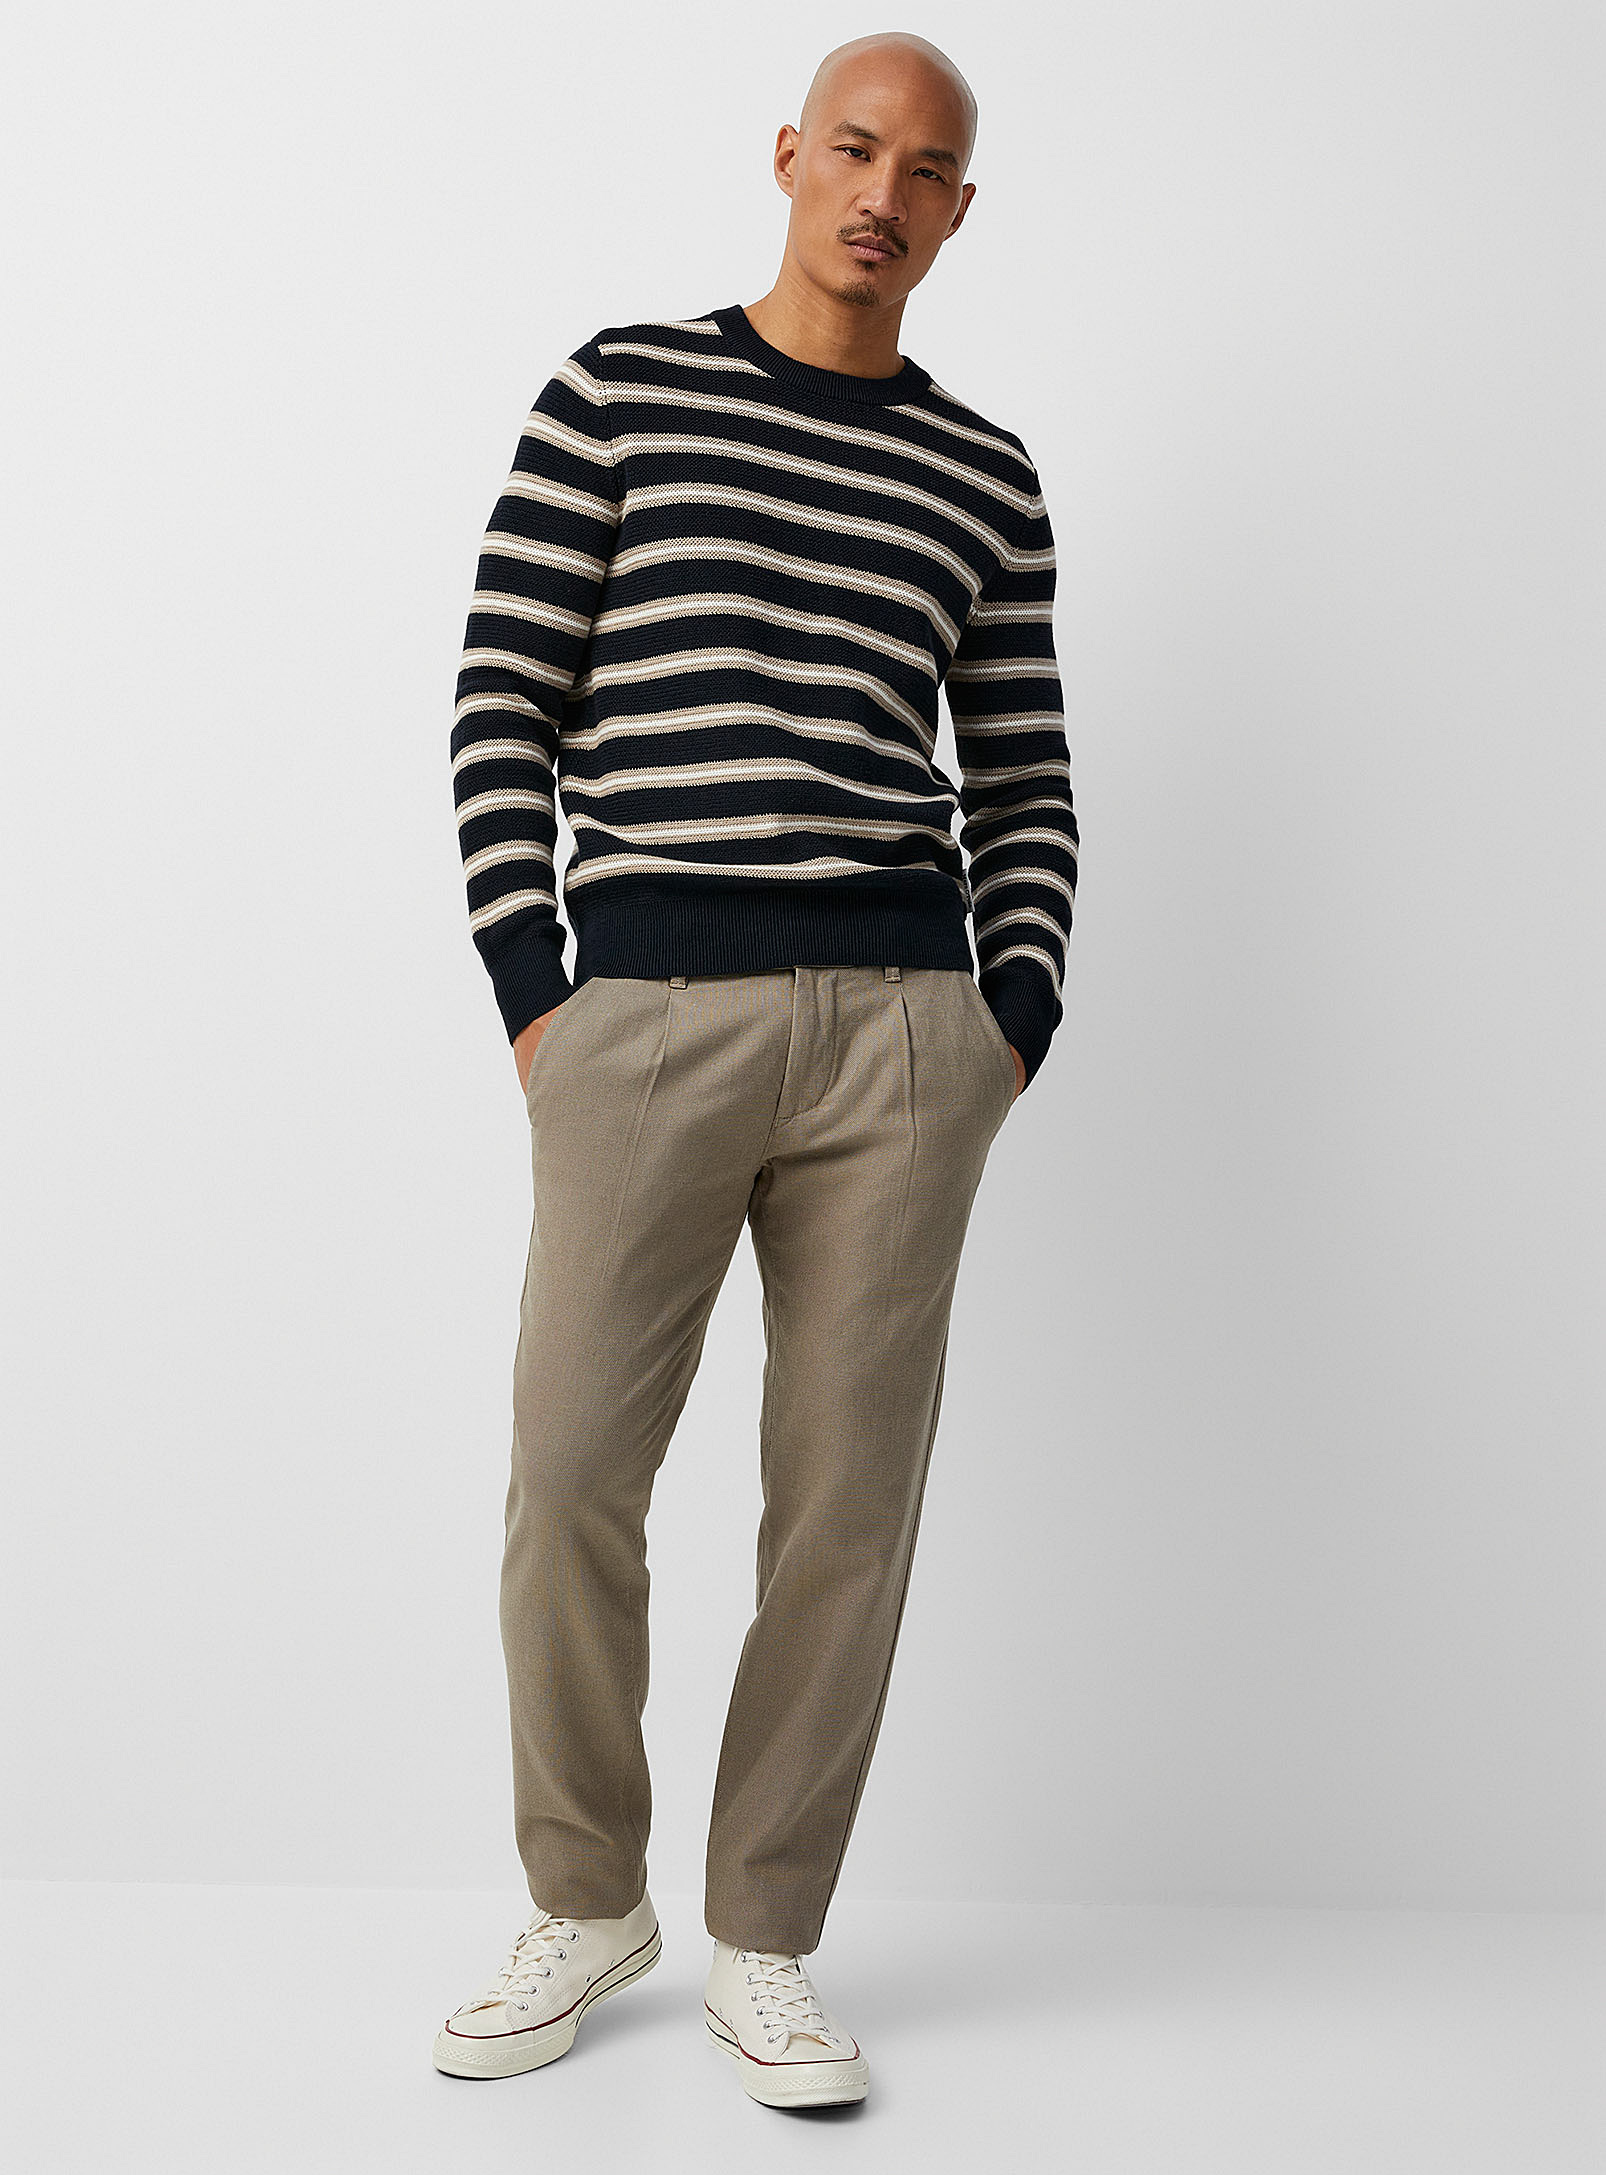 Marc O'Polo - Men's Two-tone piqué pleated pant Slim fit